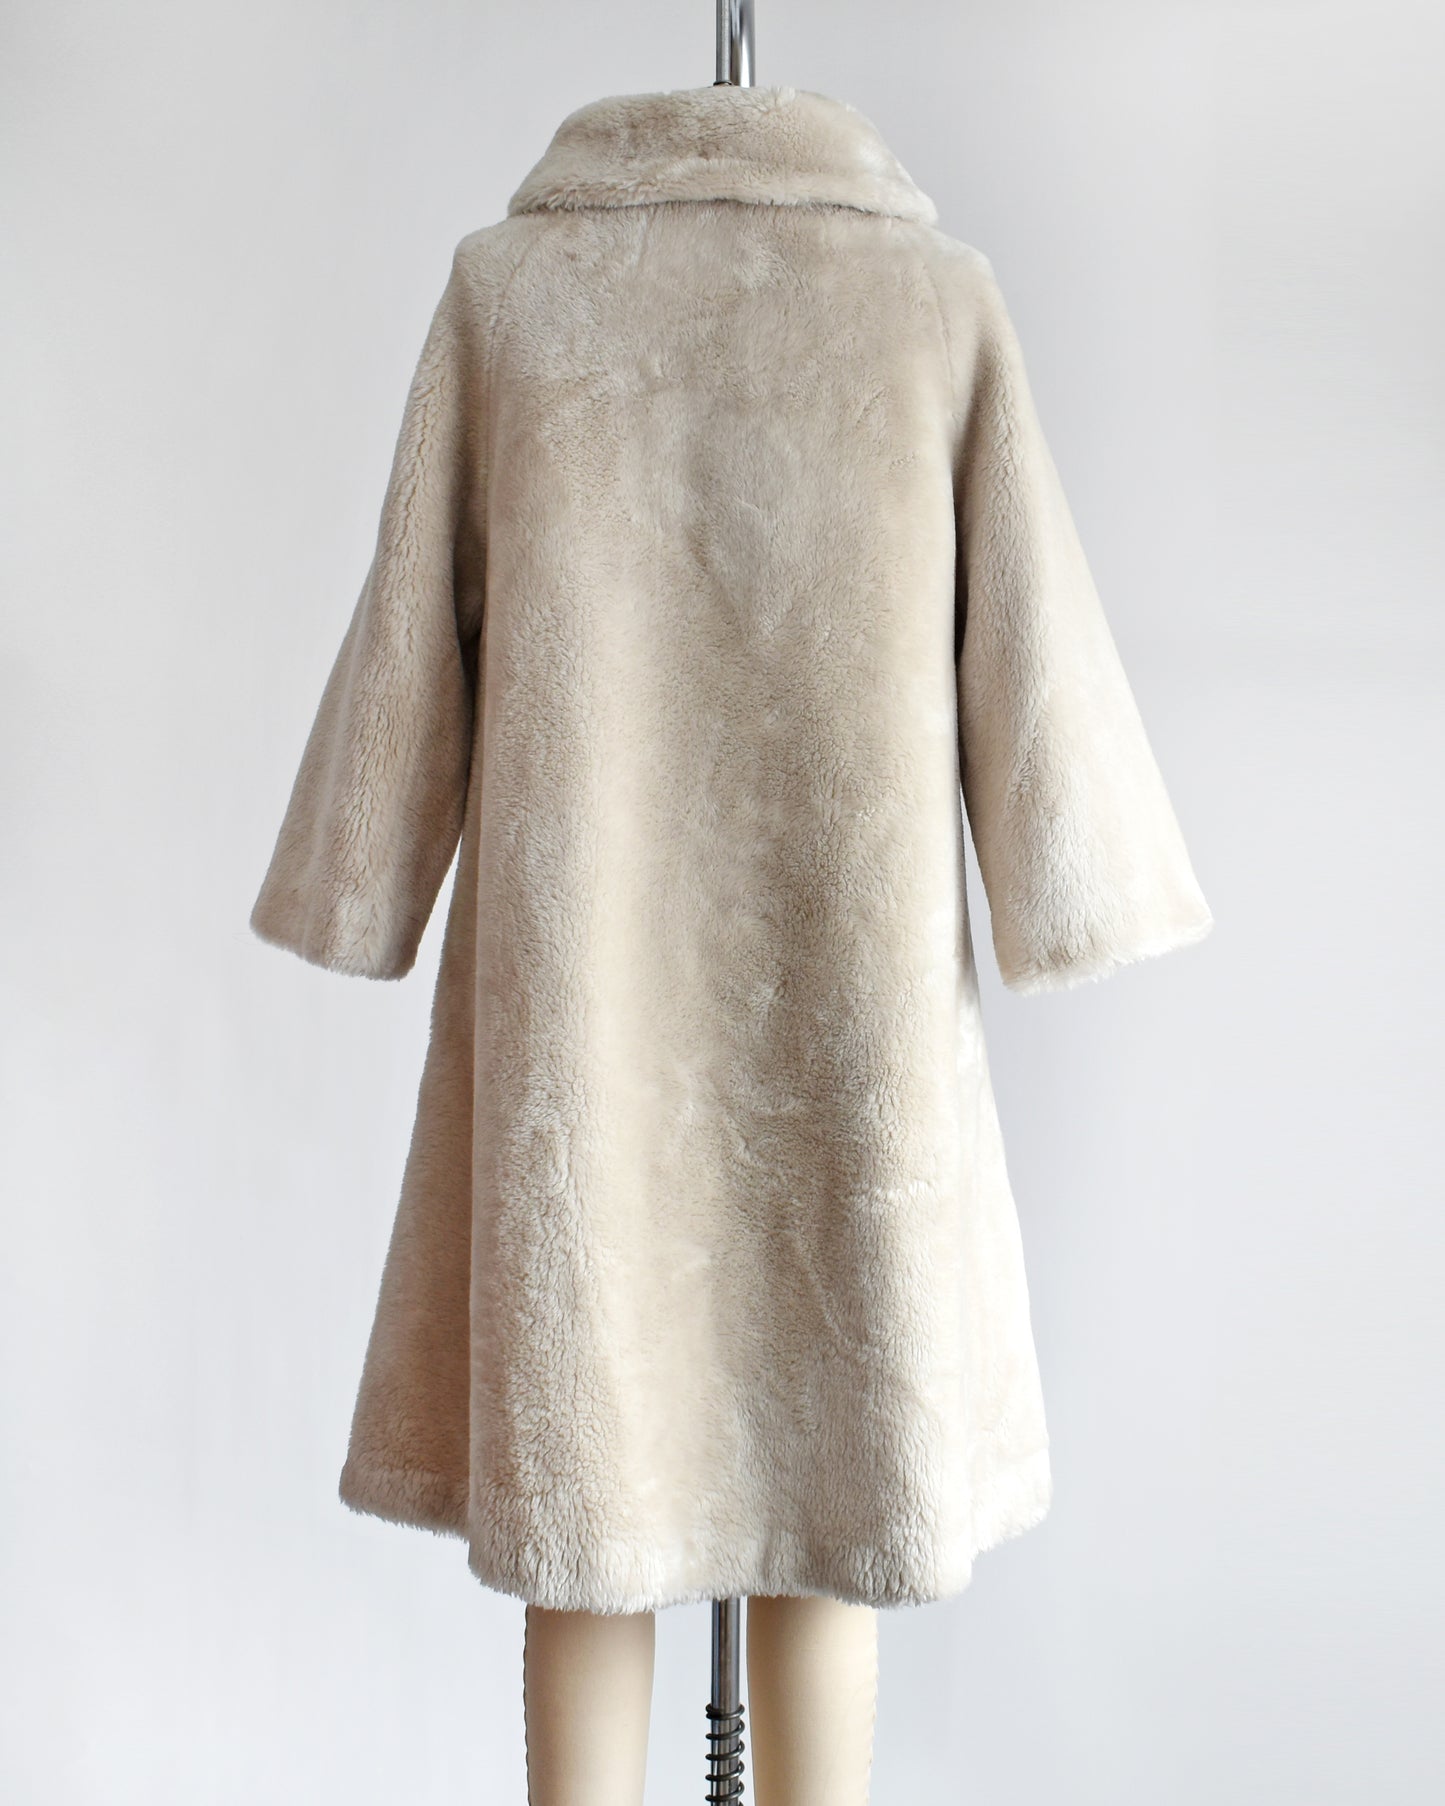 Back view of a vintage 1960s plush cream faux fur coat that features a Peter Pan style collar and three large buttons down the front